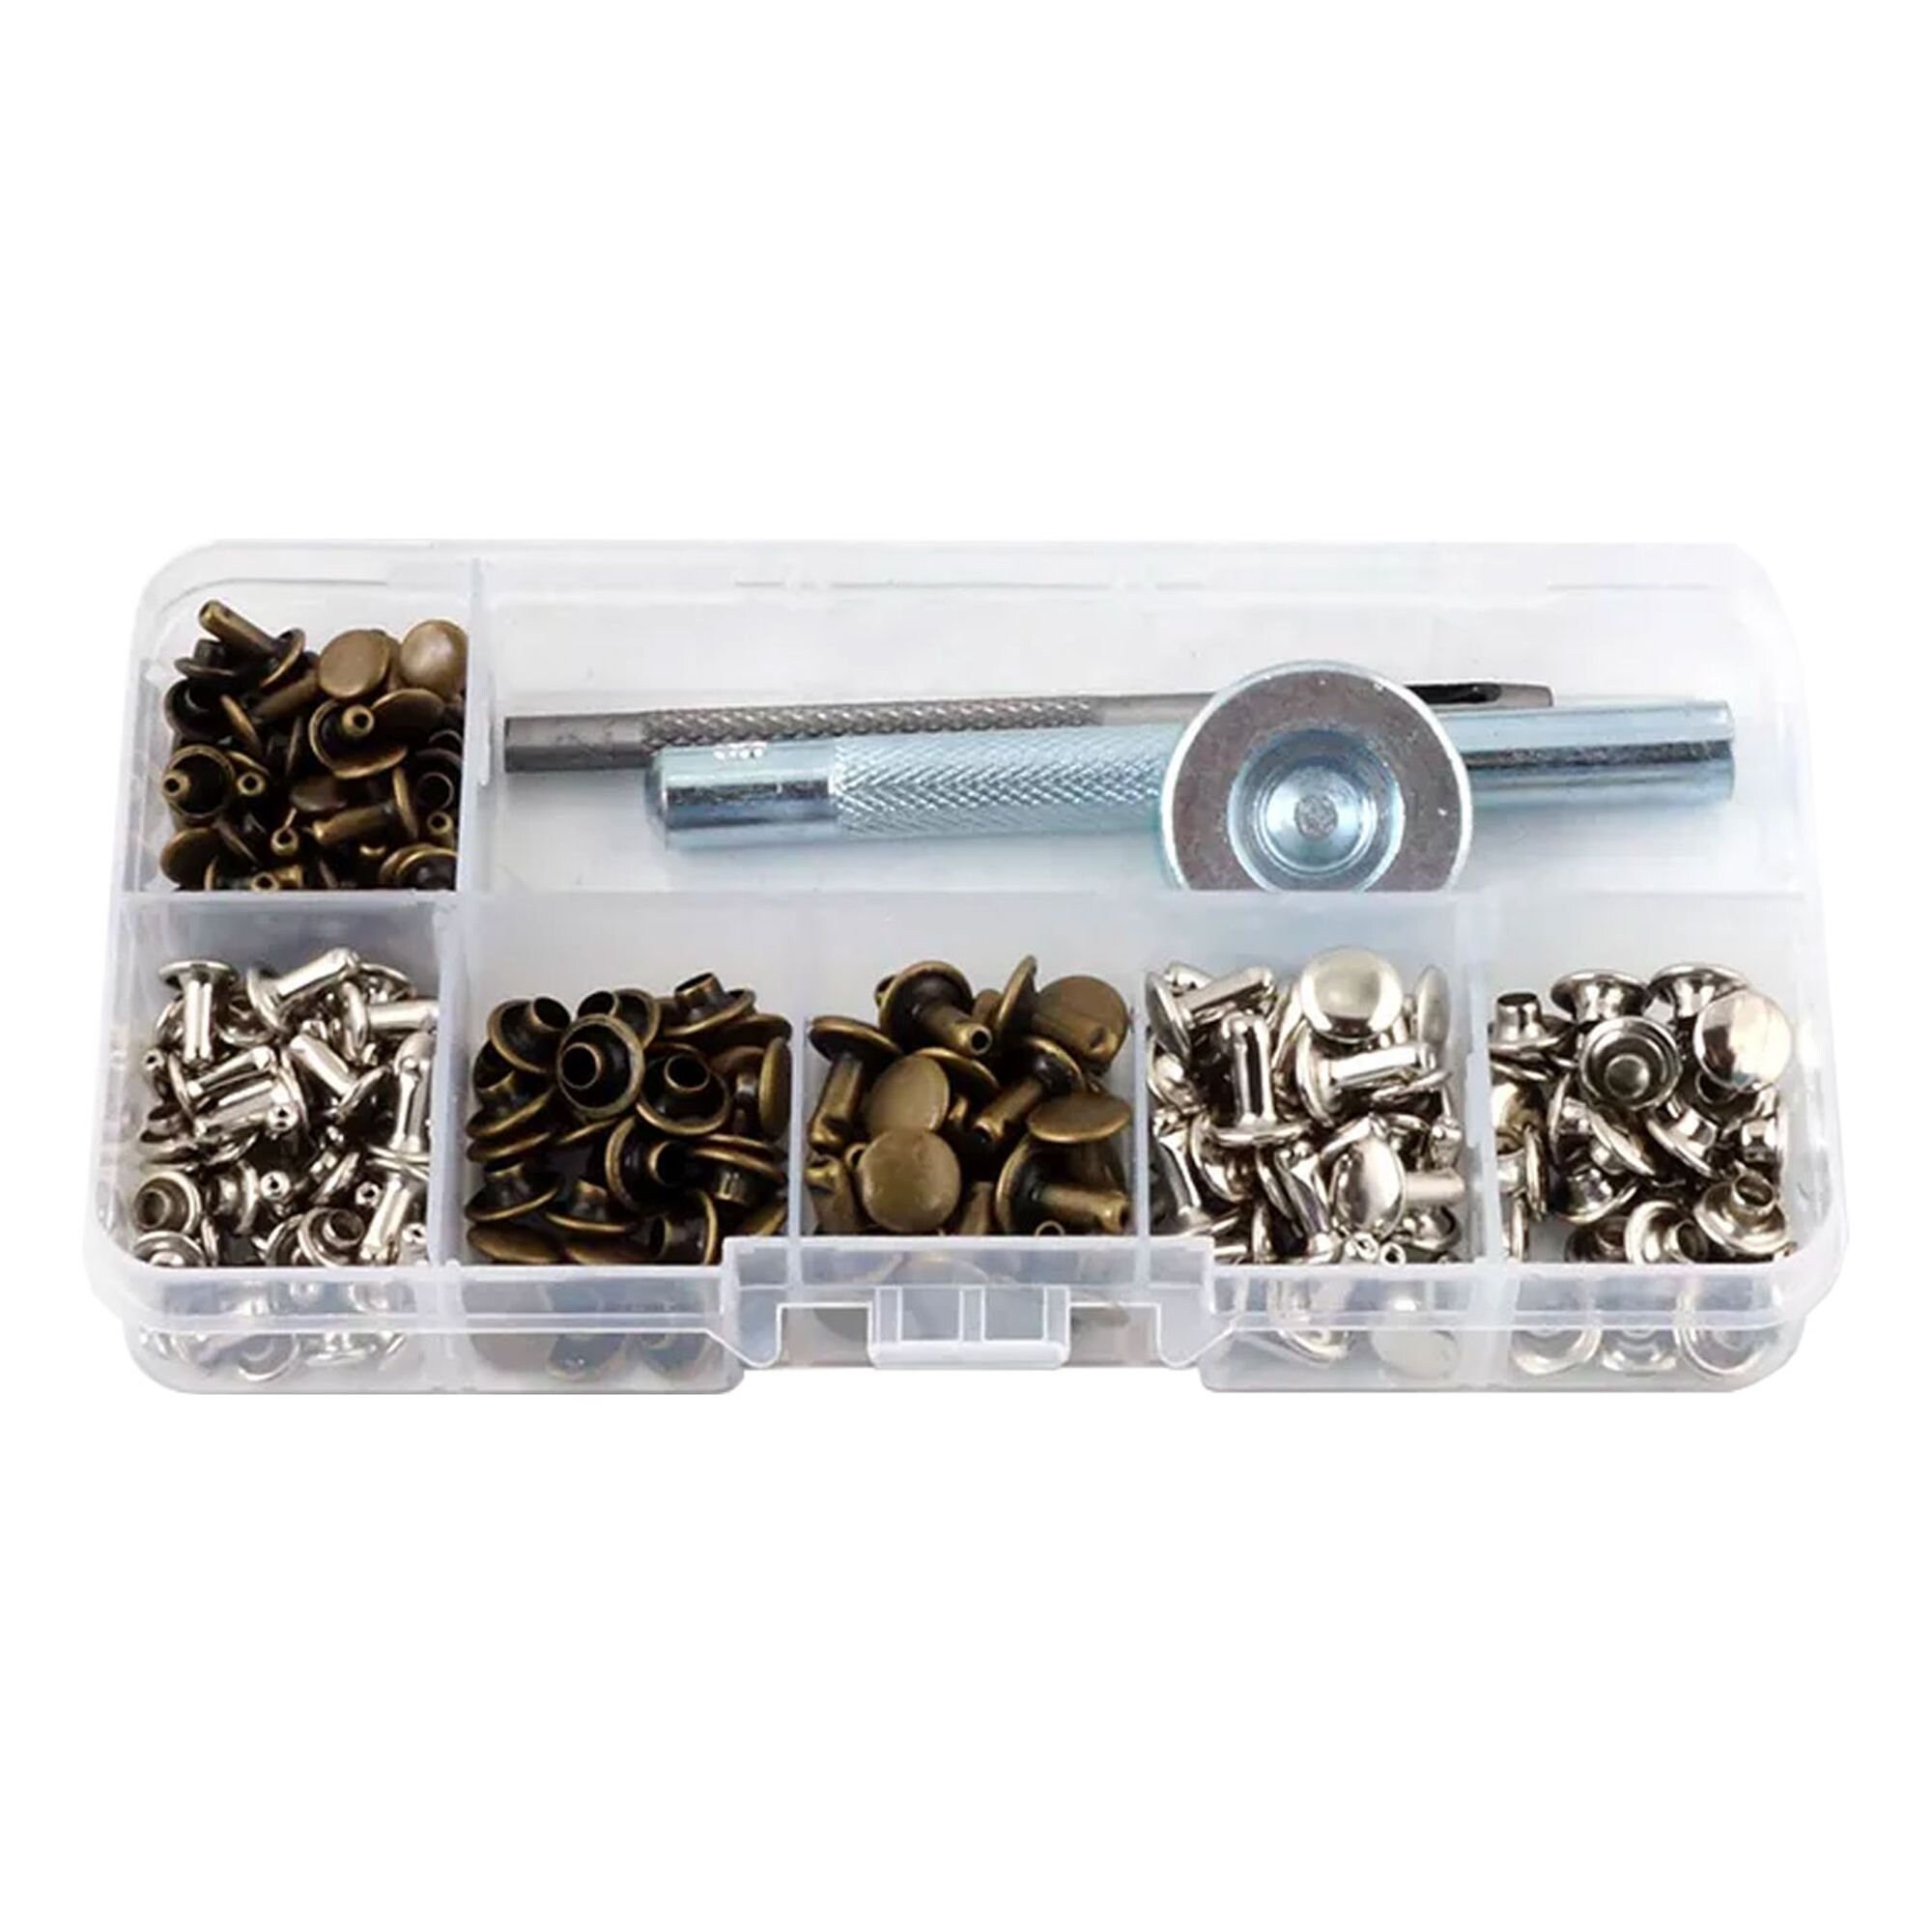 Crystal Rivet Setter Cap Rivet Setter 4-6-8mm Sizes With Hole Punch, Awl,  and Hammer Options 7 